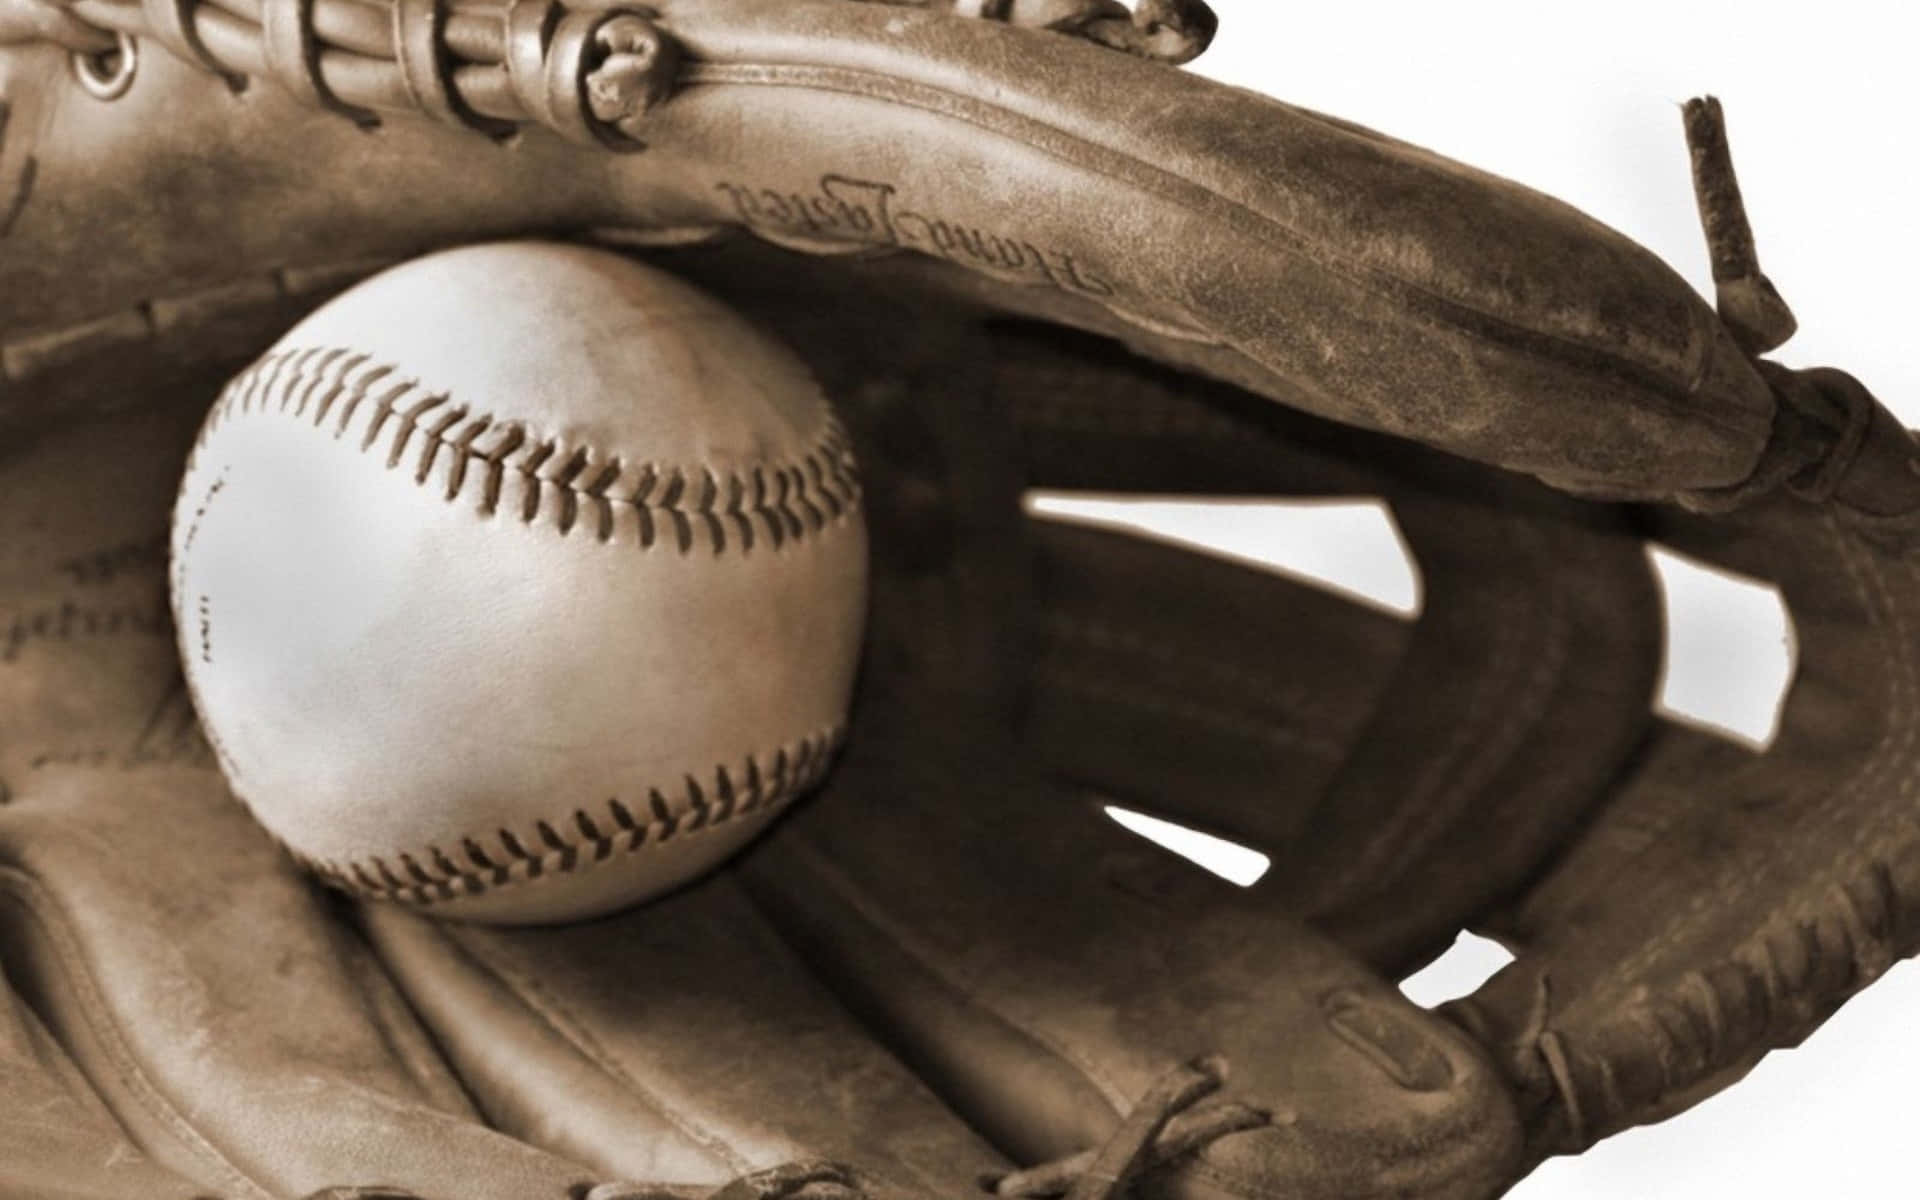 A High-Quality Baseball Glove in Action Wallpaper